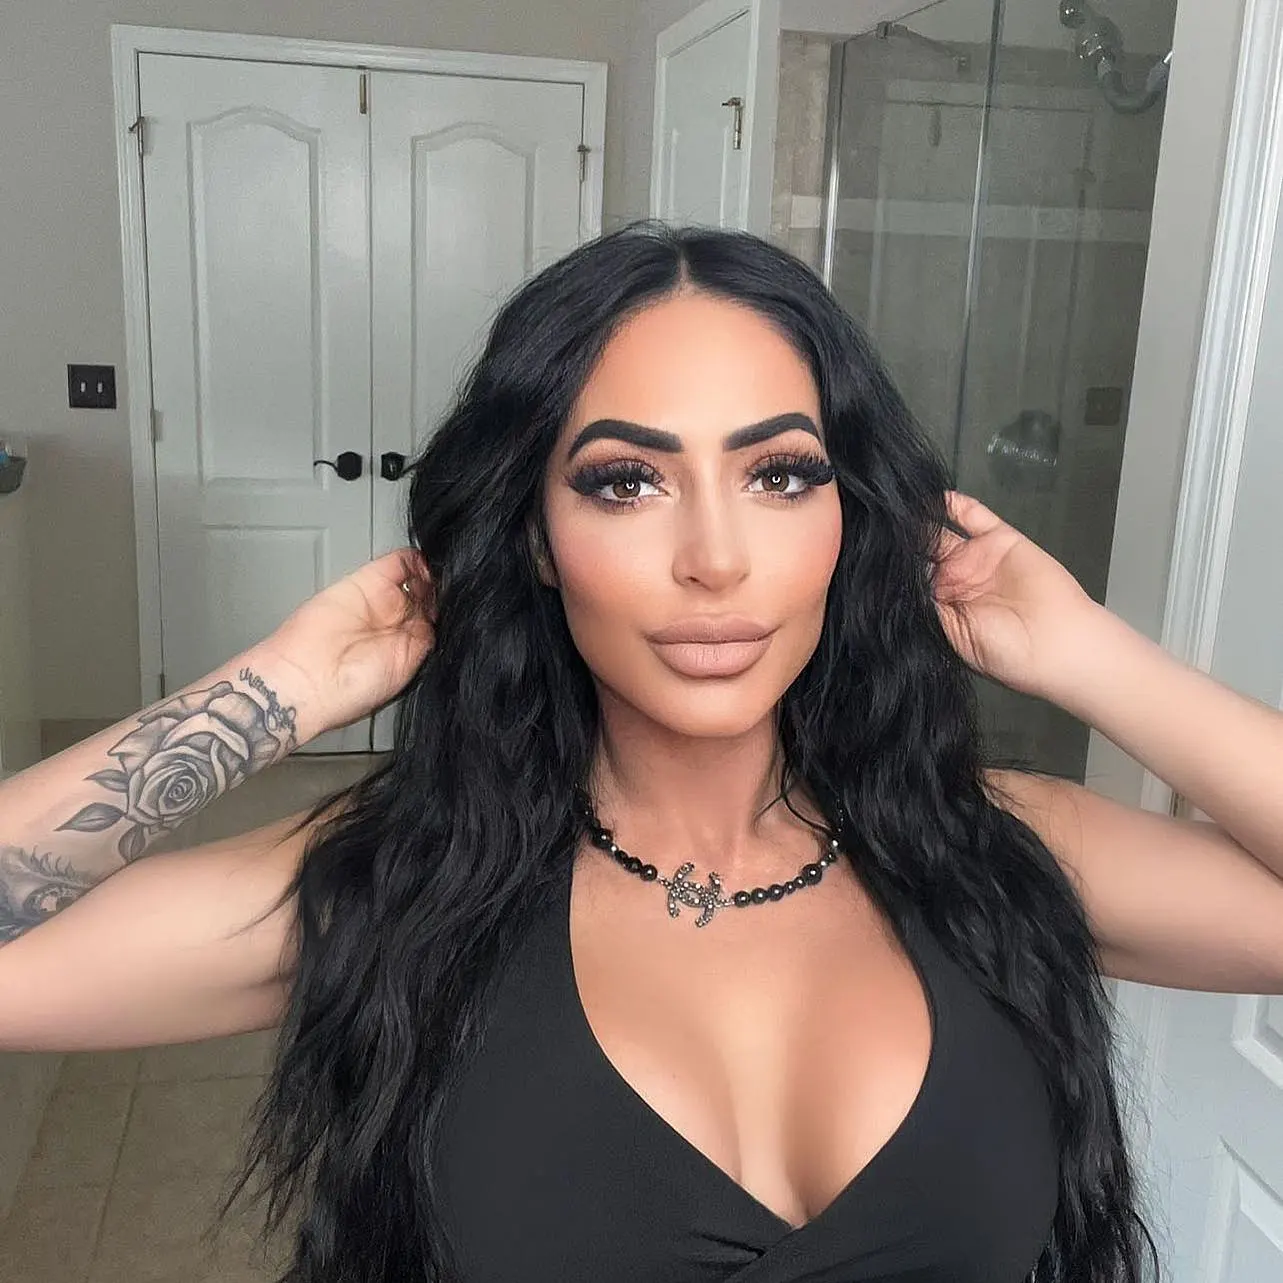 After the adultery scandal, Jersey Shore fans call Angelina Pivarnick a "liar" for denied having sex with Luis Caballero